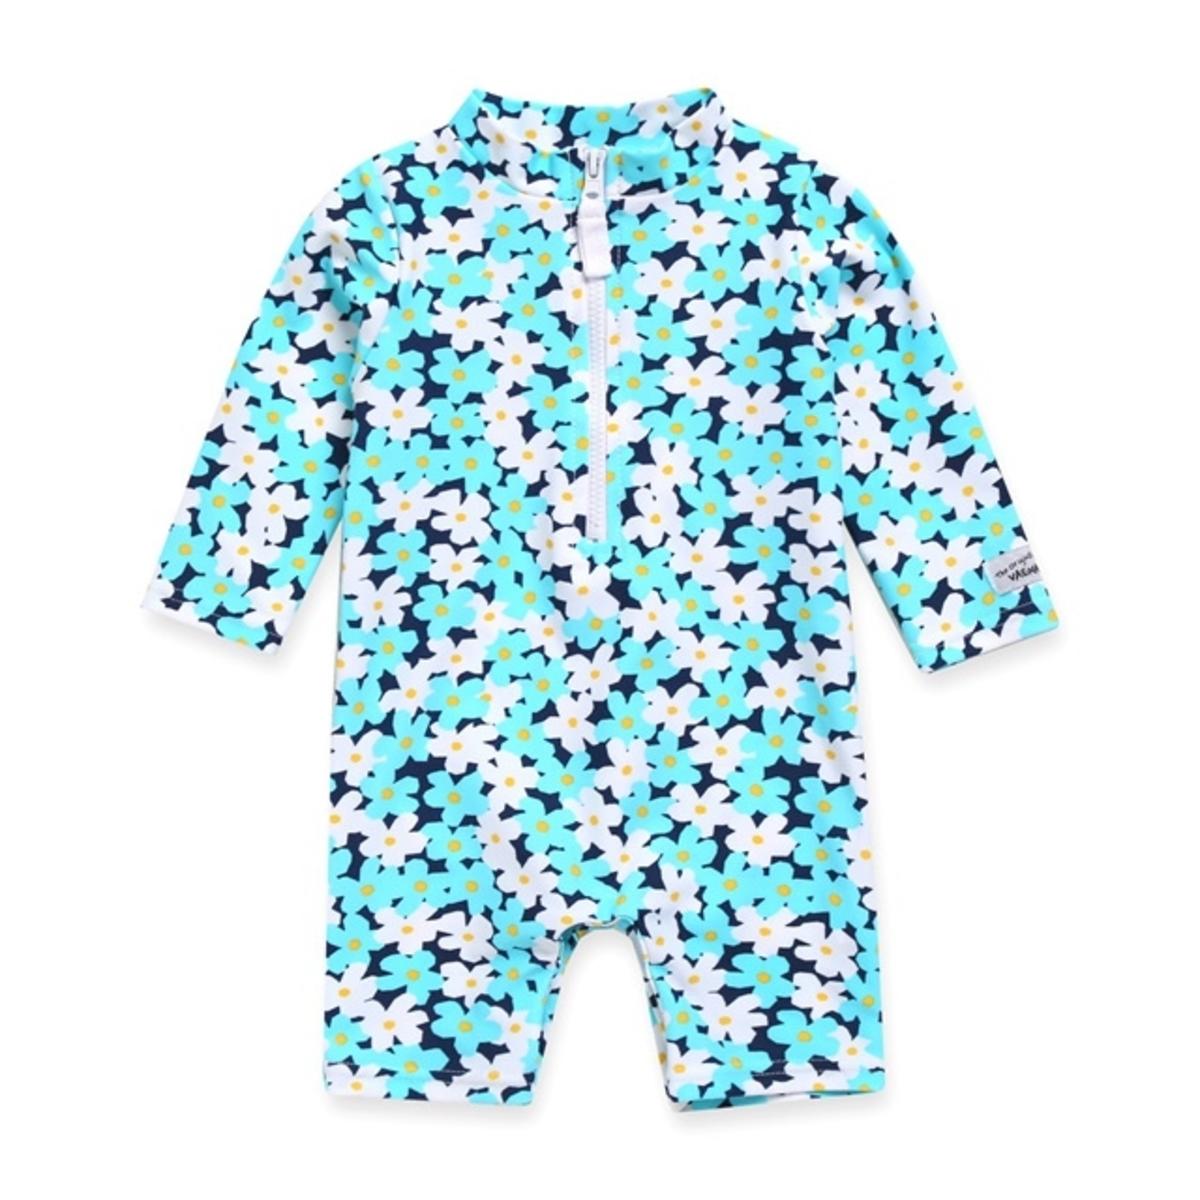 Baby Swimsuit Blue Floral